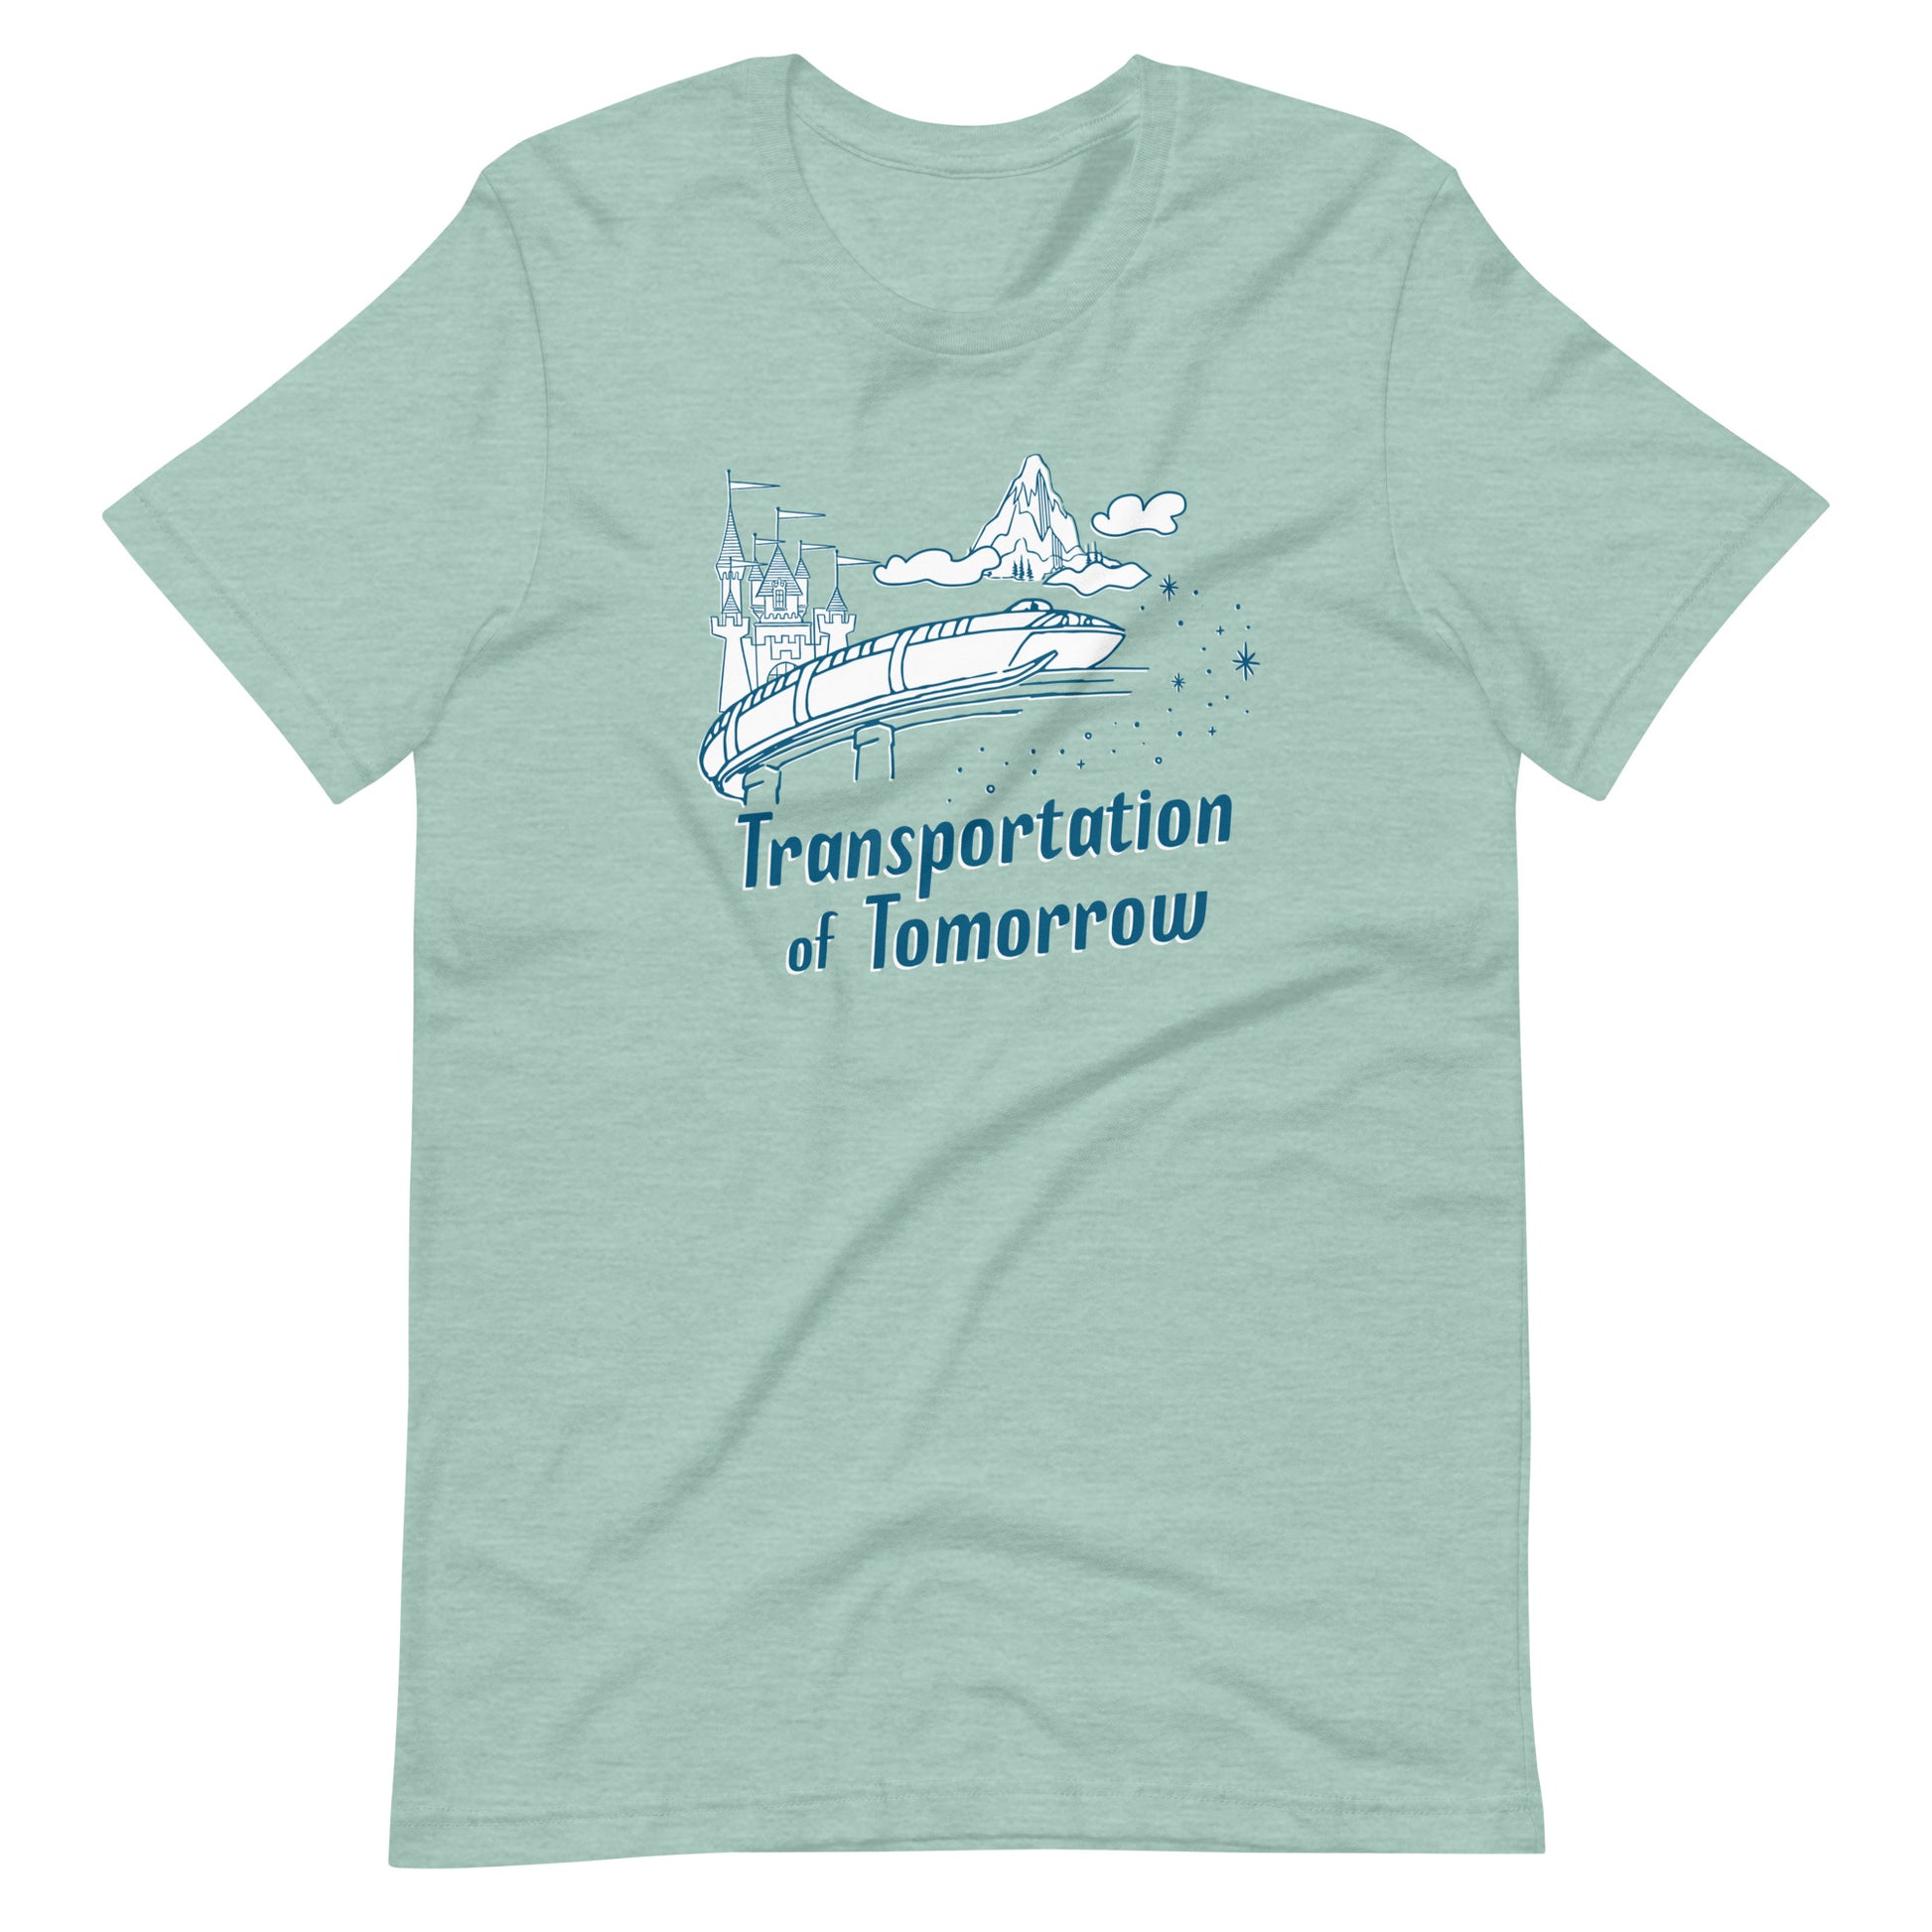 Dusty blue shirt printed with vintage style sketch of the Matterhorn, Castle, and Monorail with pixie dust. The shirt says Transportation of Tomorrow.